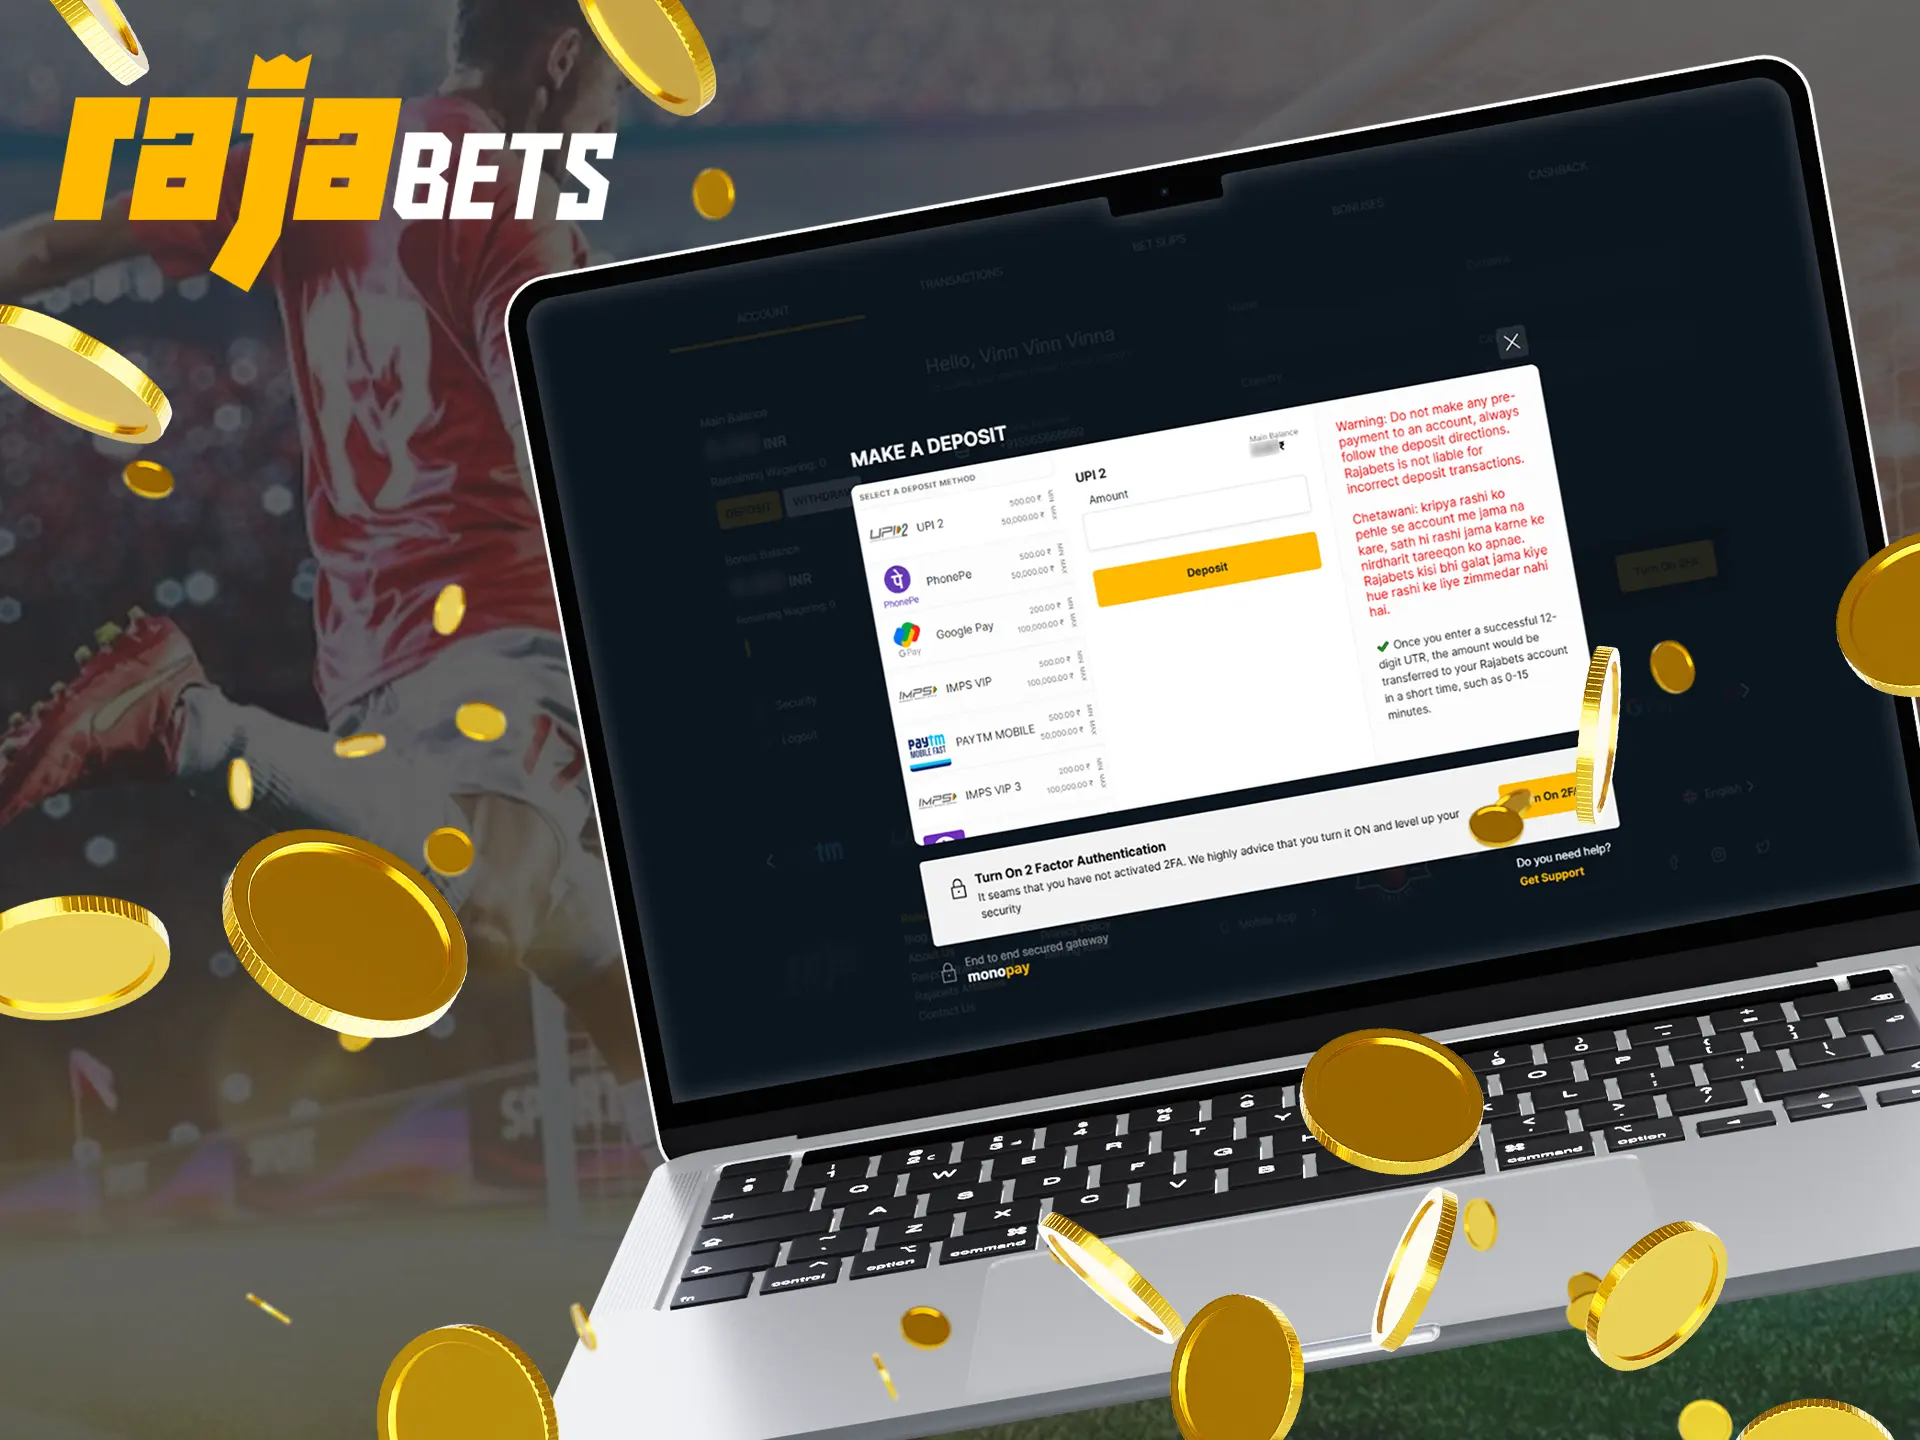 Rajabets offers several payment methods.